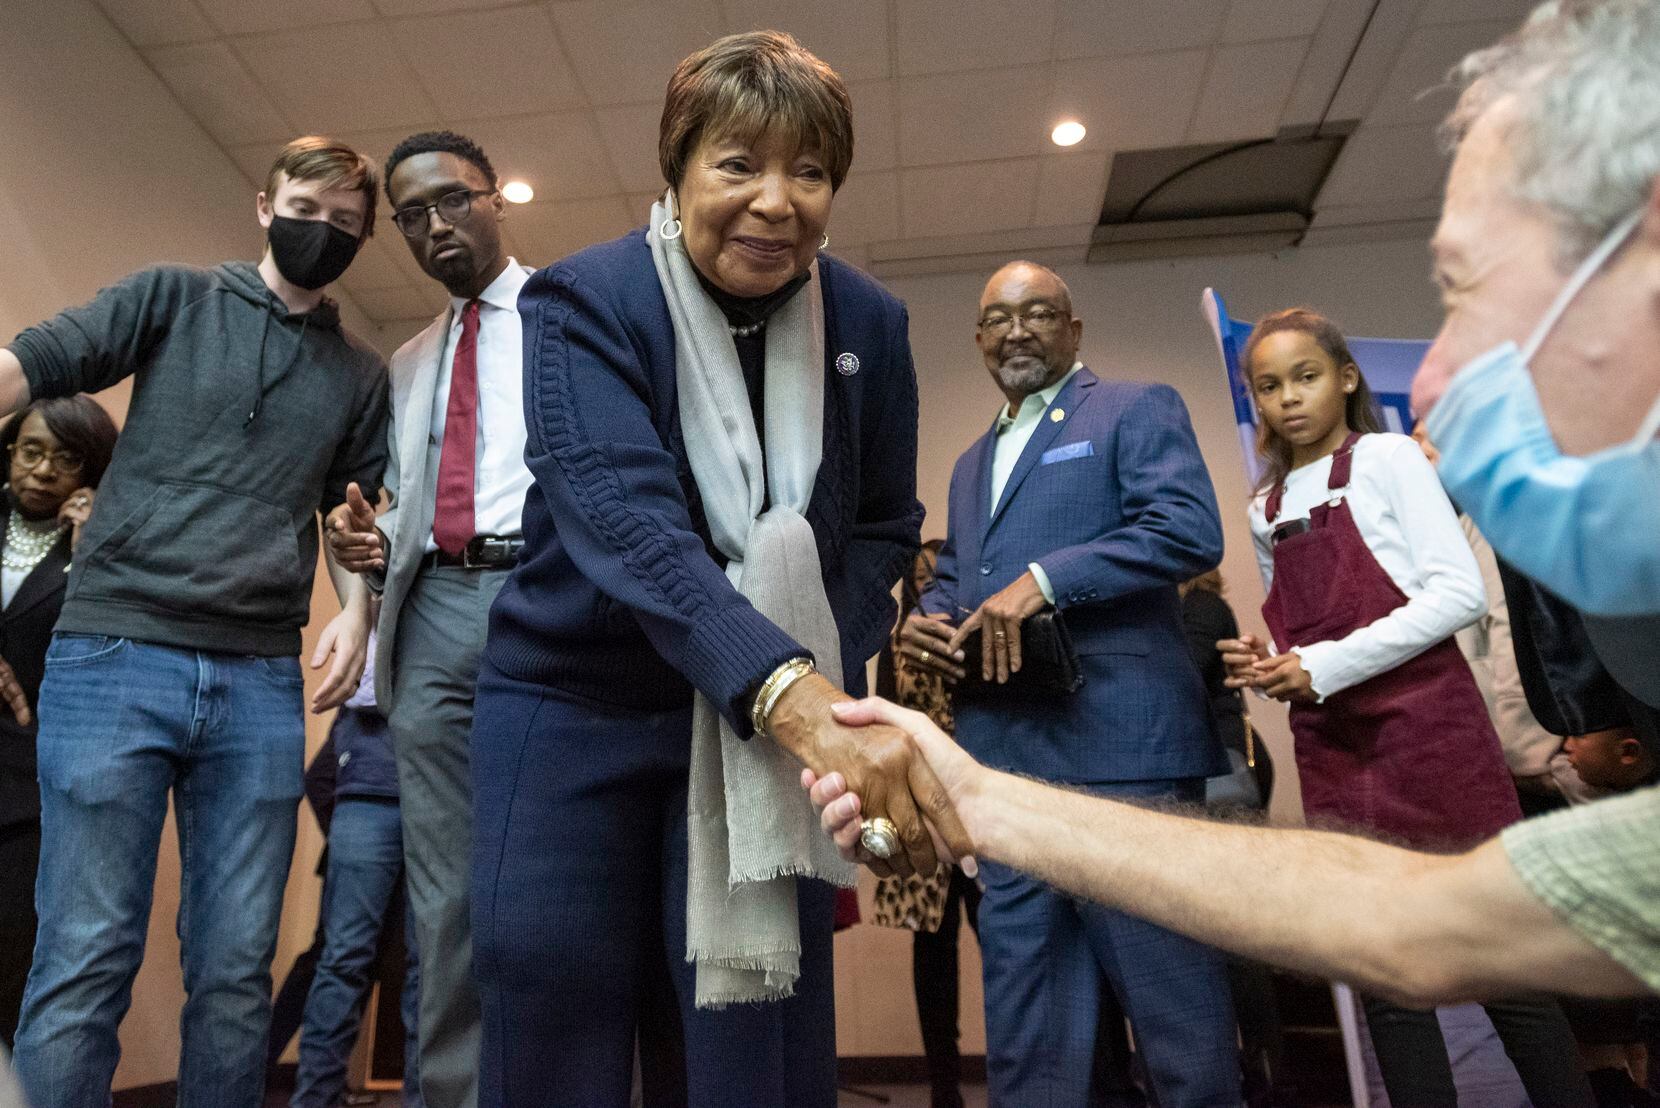 U.S. Rep. Eddie Bernice Johnson is congratulated by friends and colleagues after she announced that she will retire from Congress during “The Justice Tour